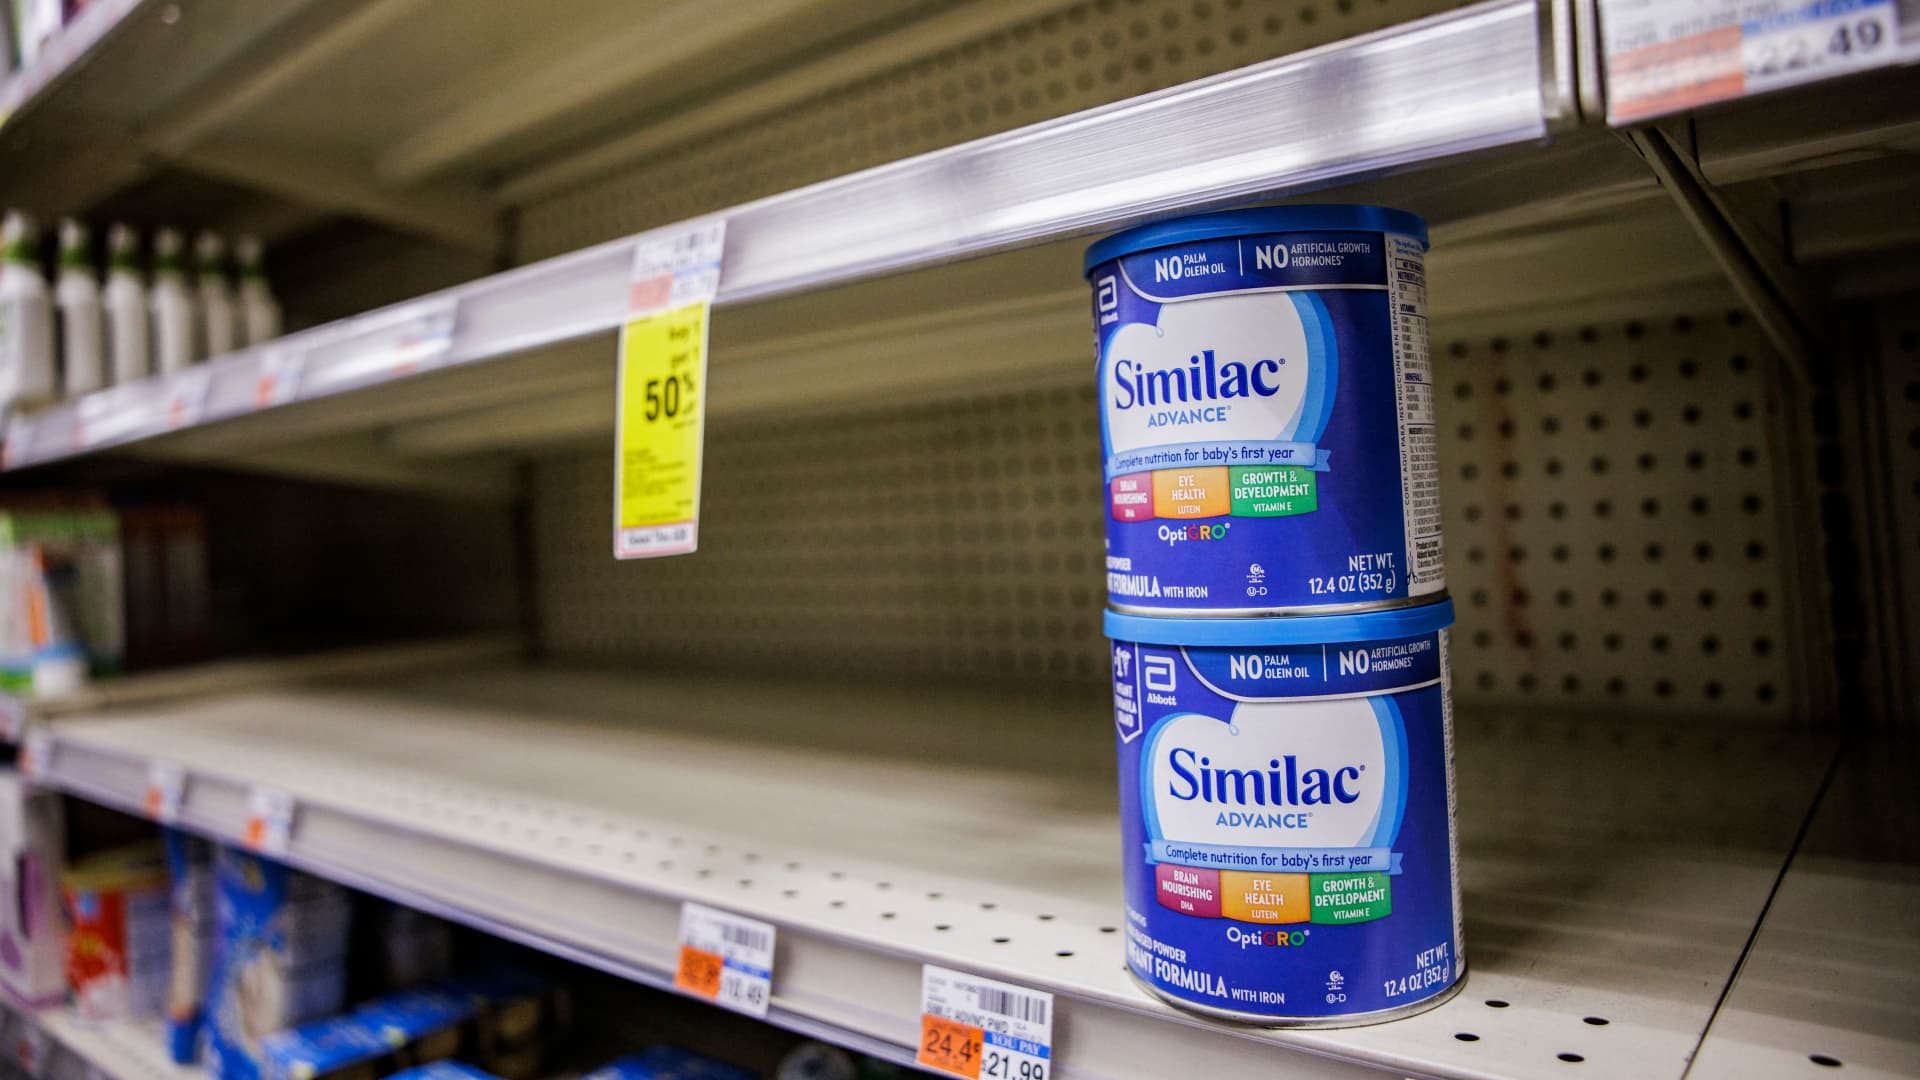 Baby formula supply should return to normal in two months, FDA commissioner says